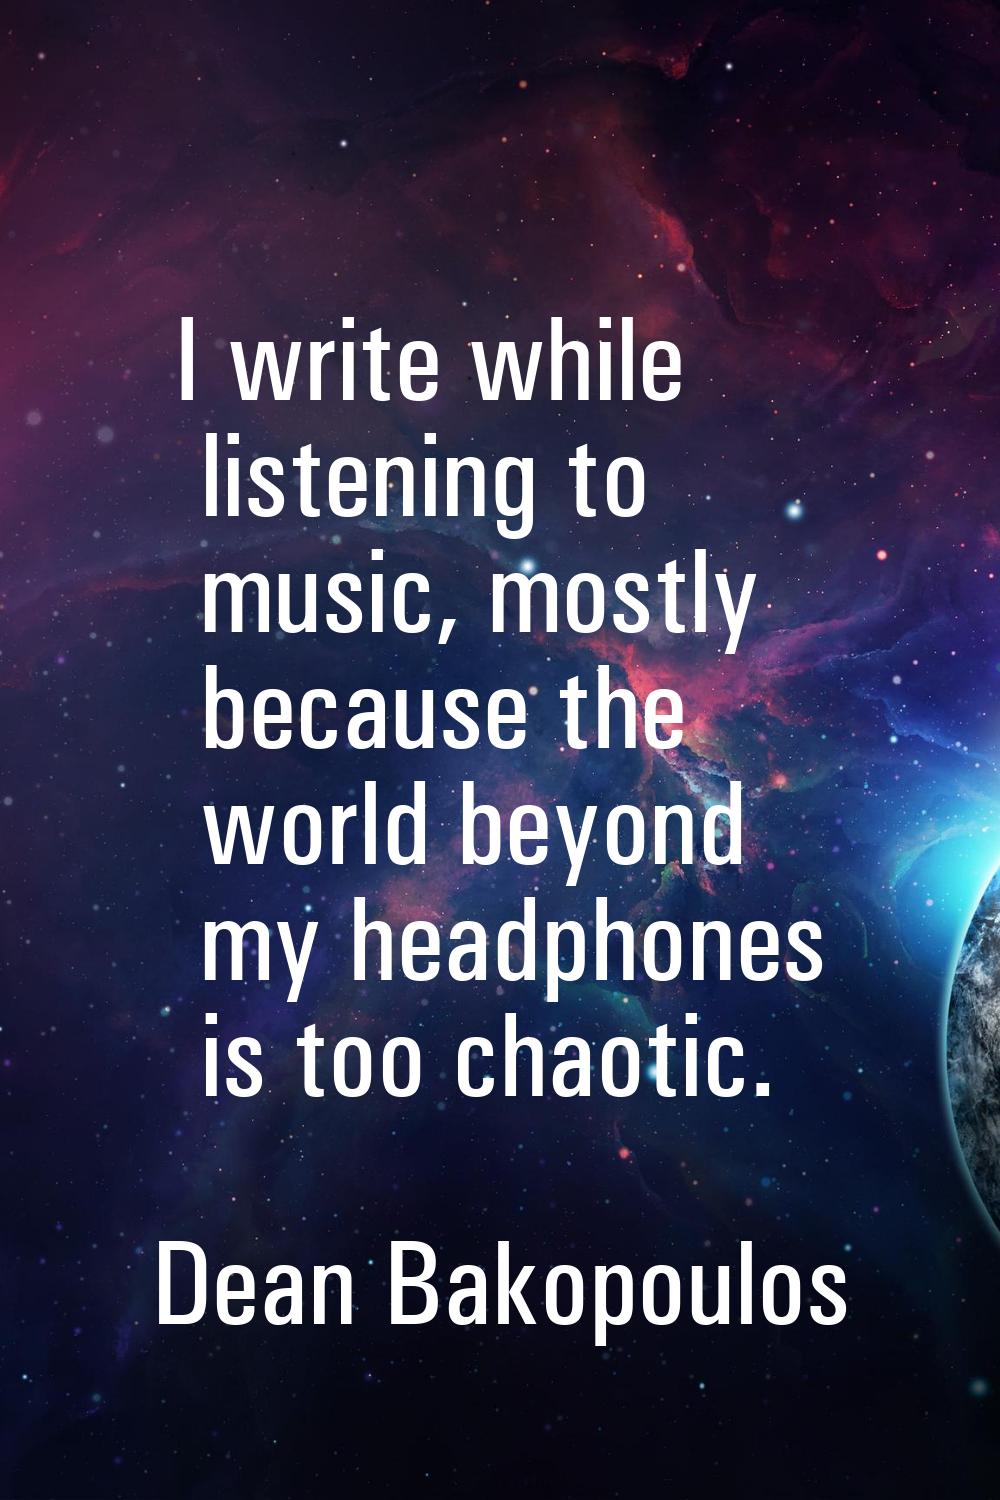 I write while listening to music, mostly because the world beyond my headphones is too chaotic.